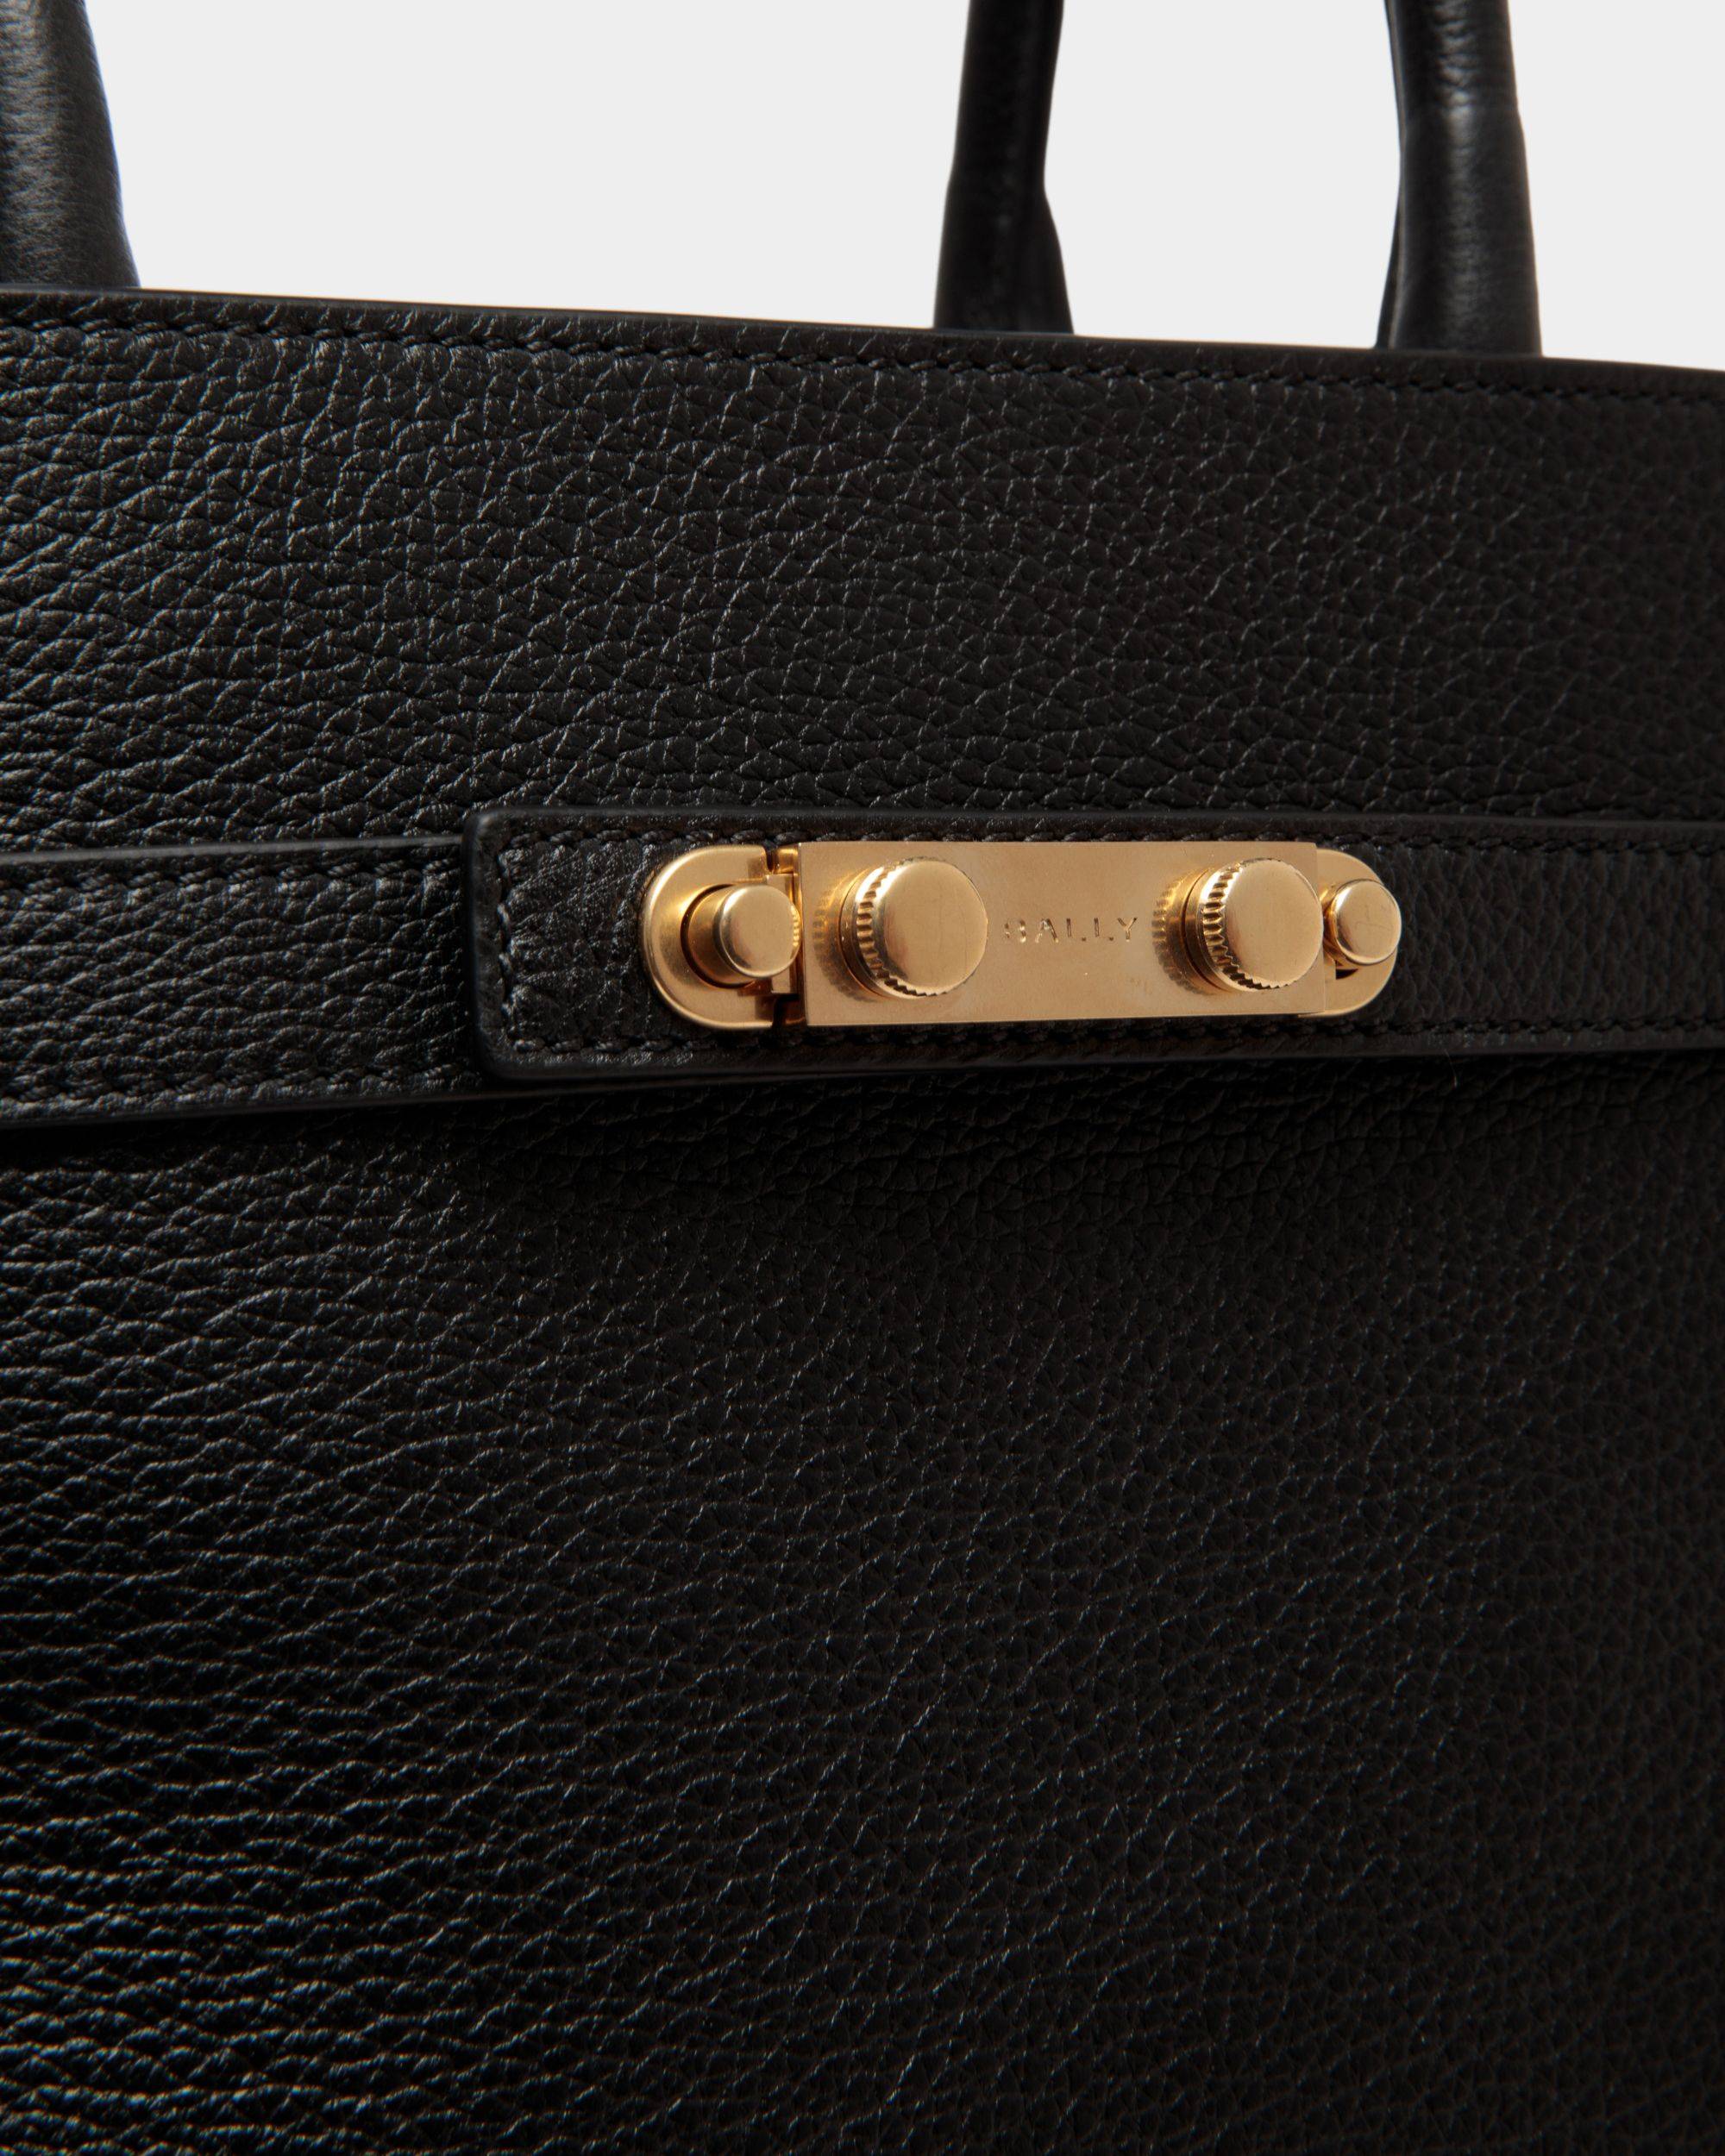 Carriage | Women's Tote in Black Leather | Bally | Still Life Detail